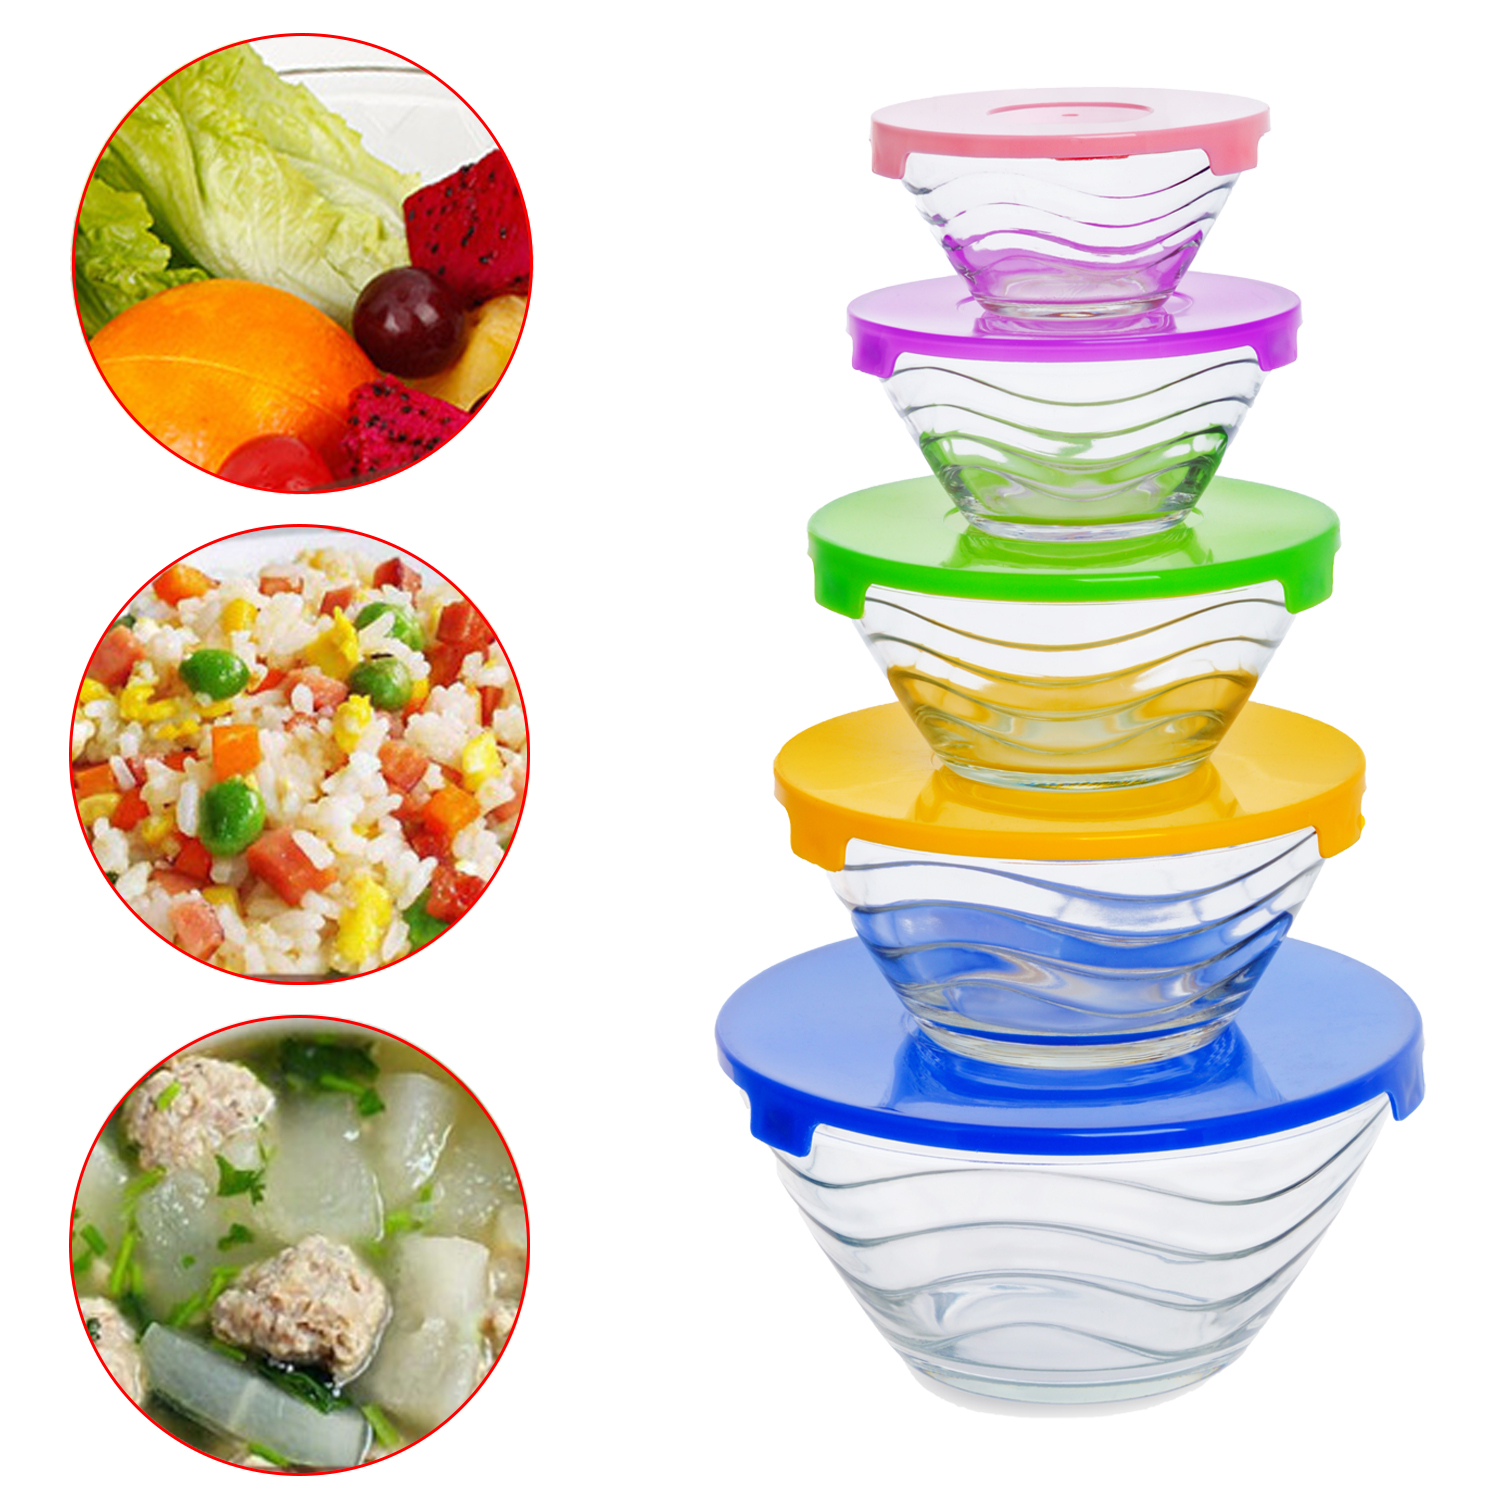 5 Pcs Glass Mixing Bowl Set With Cover Bowl Glass Mixing Bowl Salad Bowl Lunch Box Mask Bowl